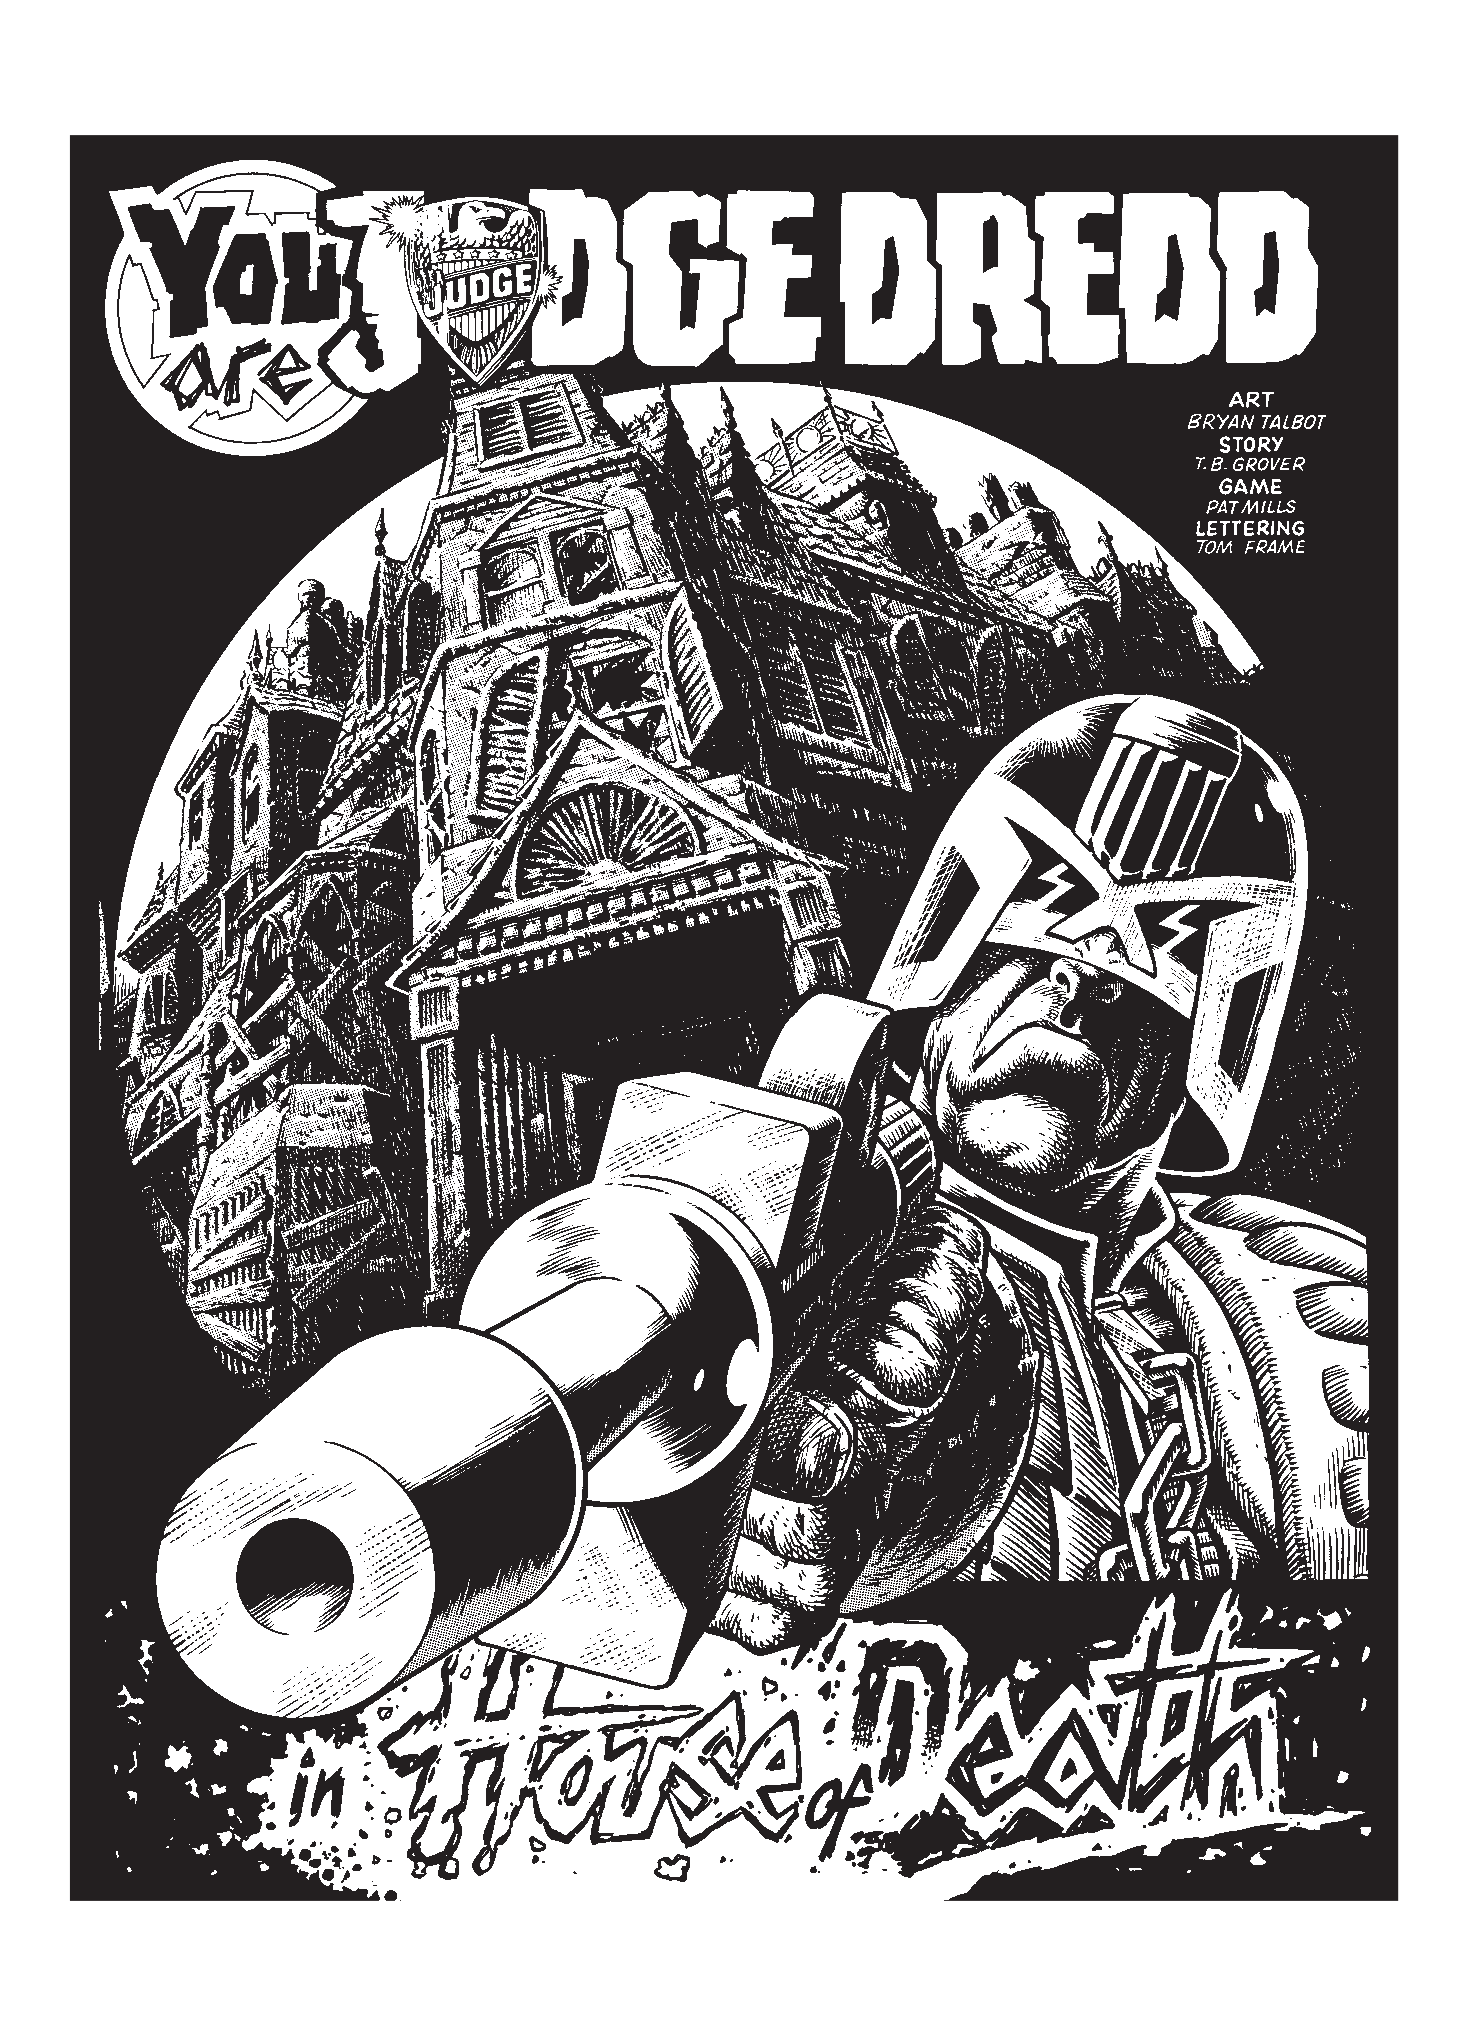 Read online Judge Dredd: The Restricted Files comic -  Issue # TPB 4 - 219